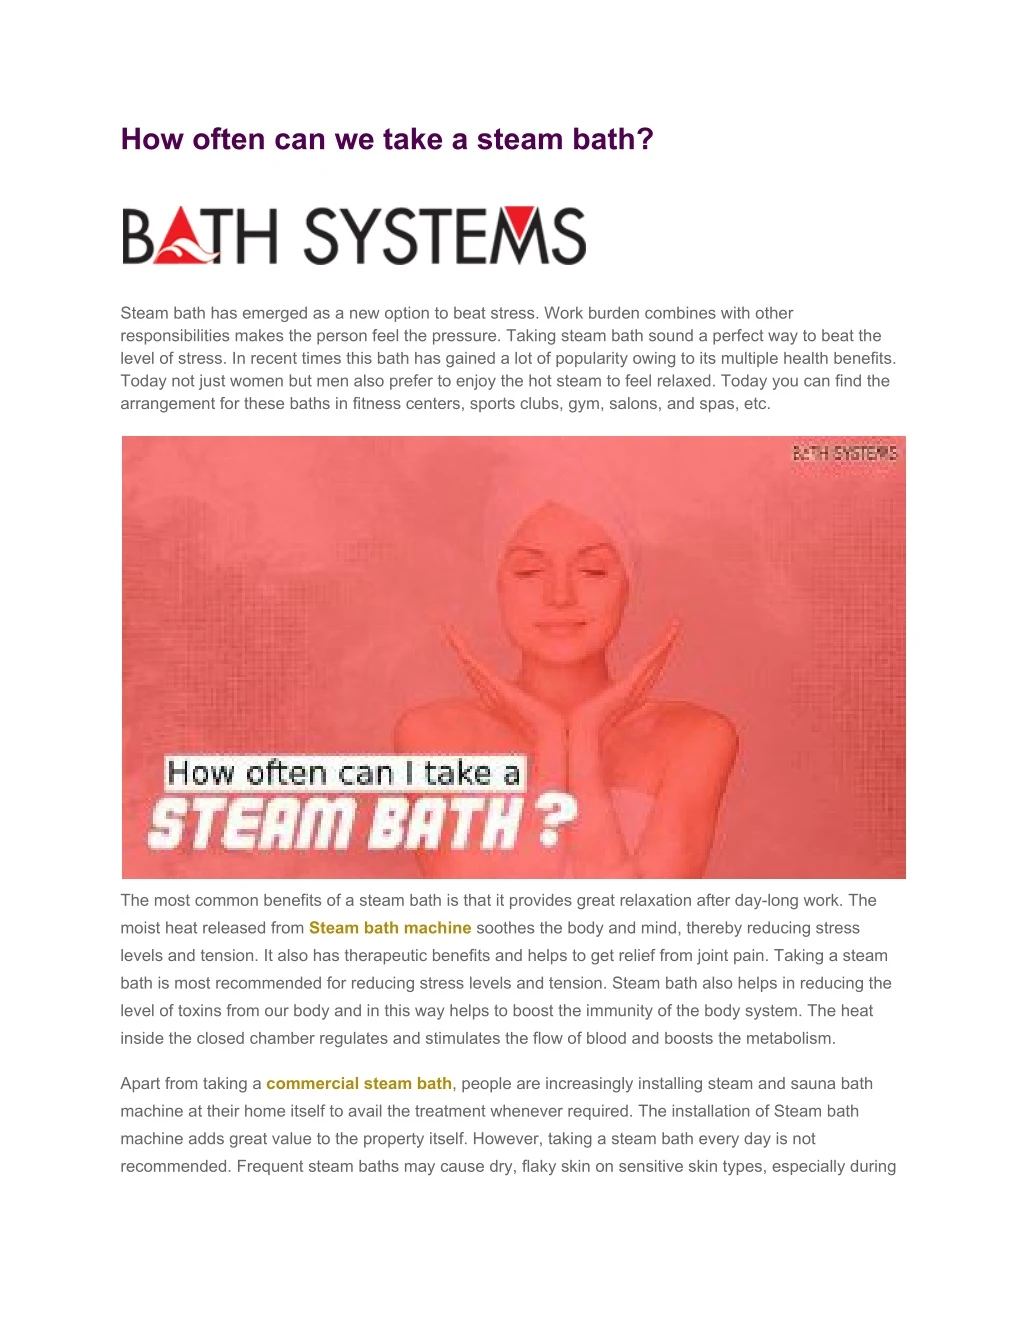 how often can we take a steam bath